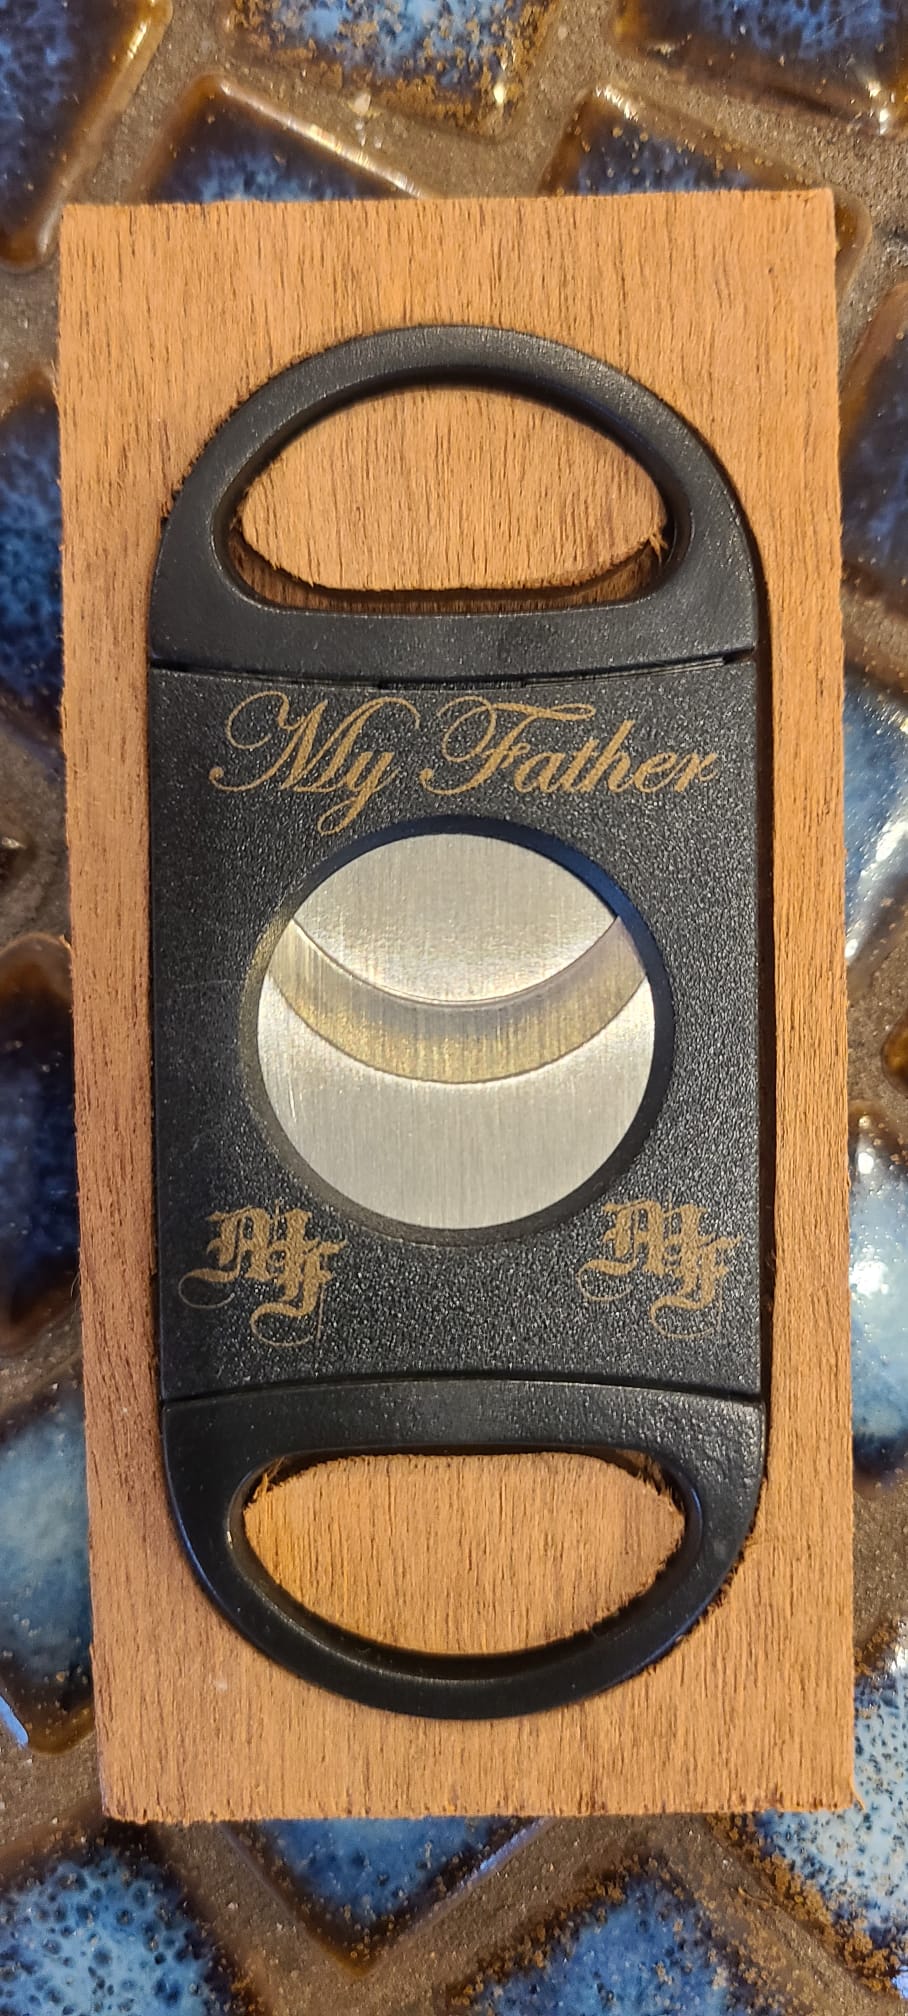 My Father Cutter